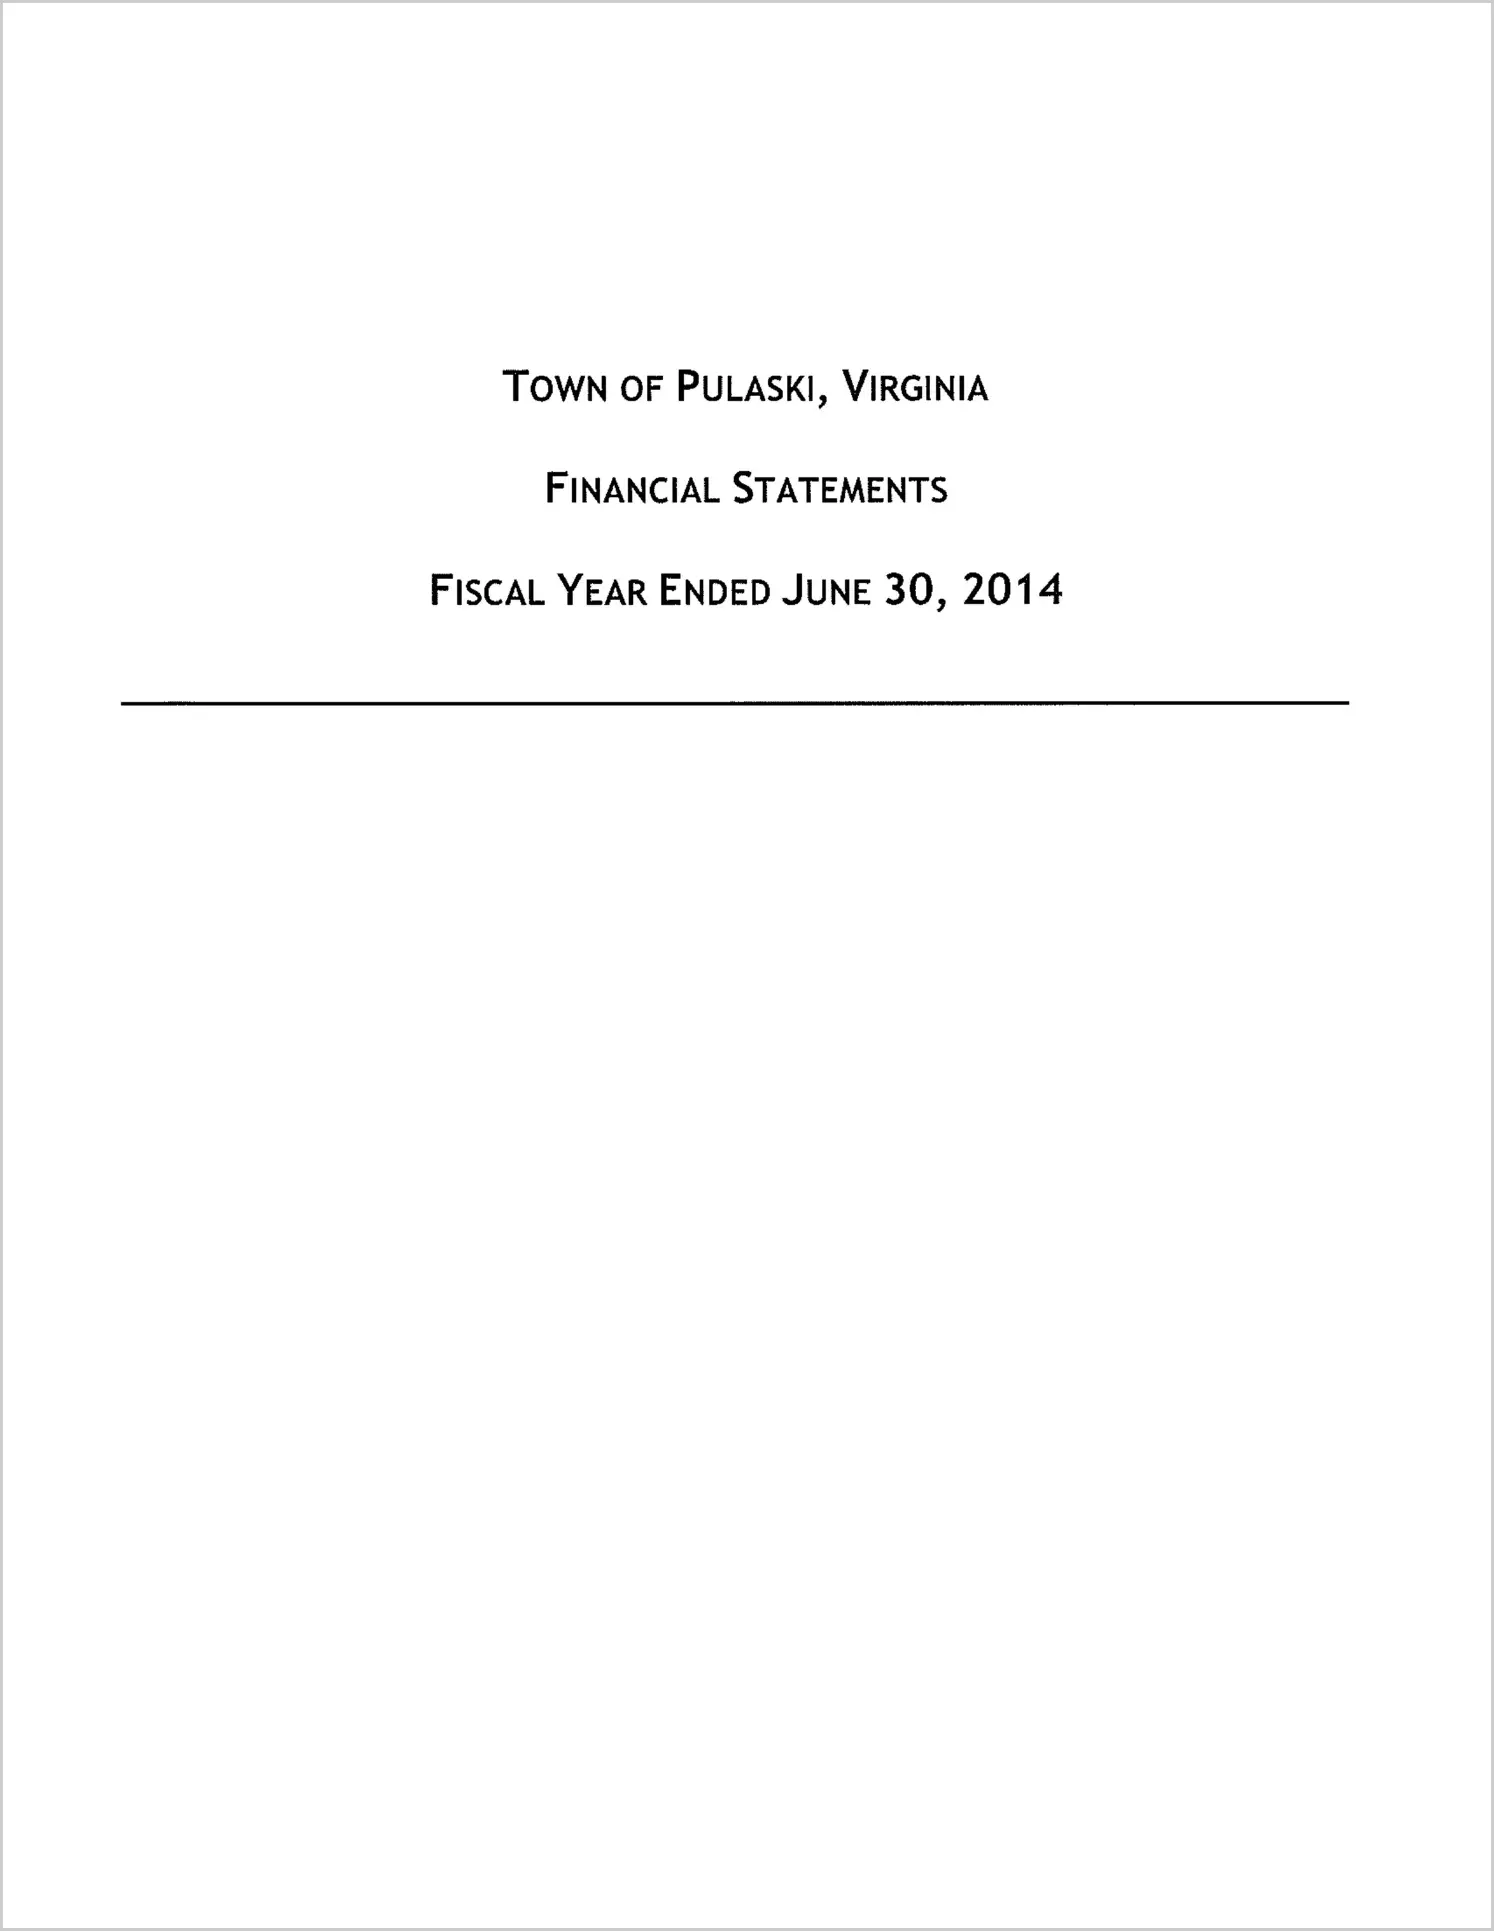 2014 Annual Financial Report for Town of Pulaski